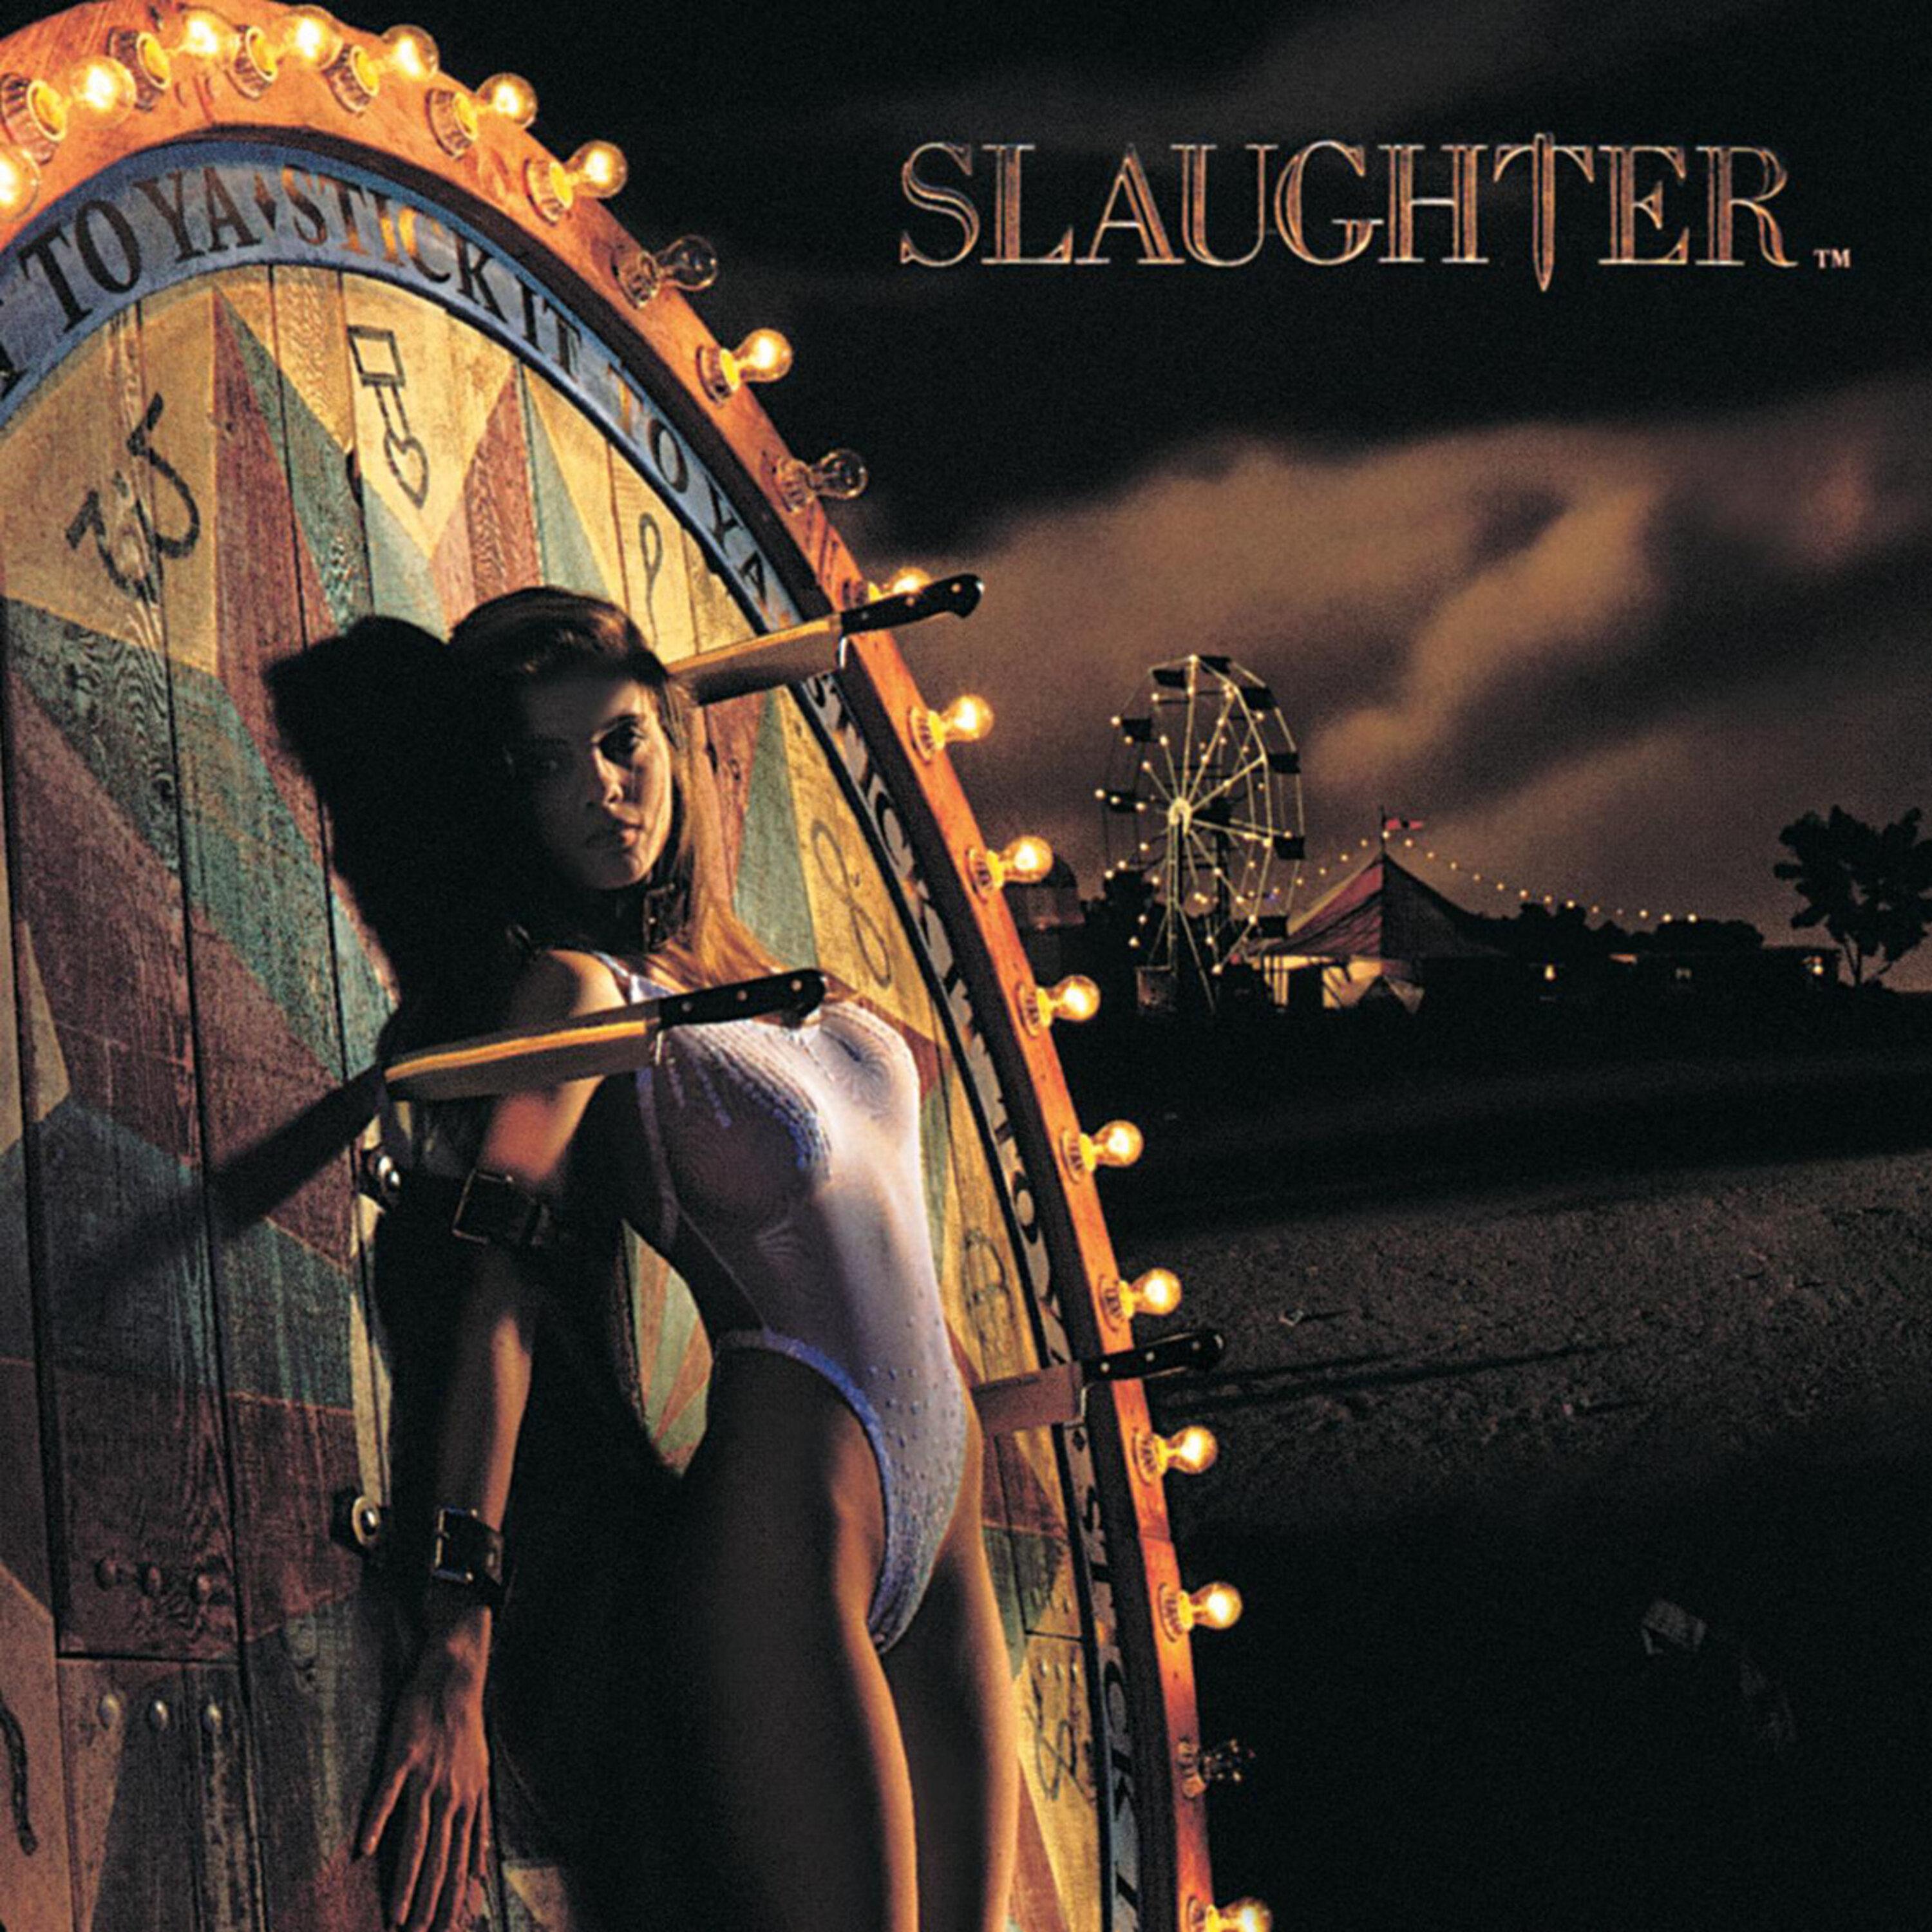 Slaughter - Gave Me Your Heart (Remastered 2003)